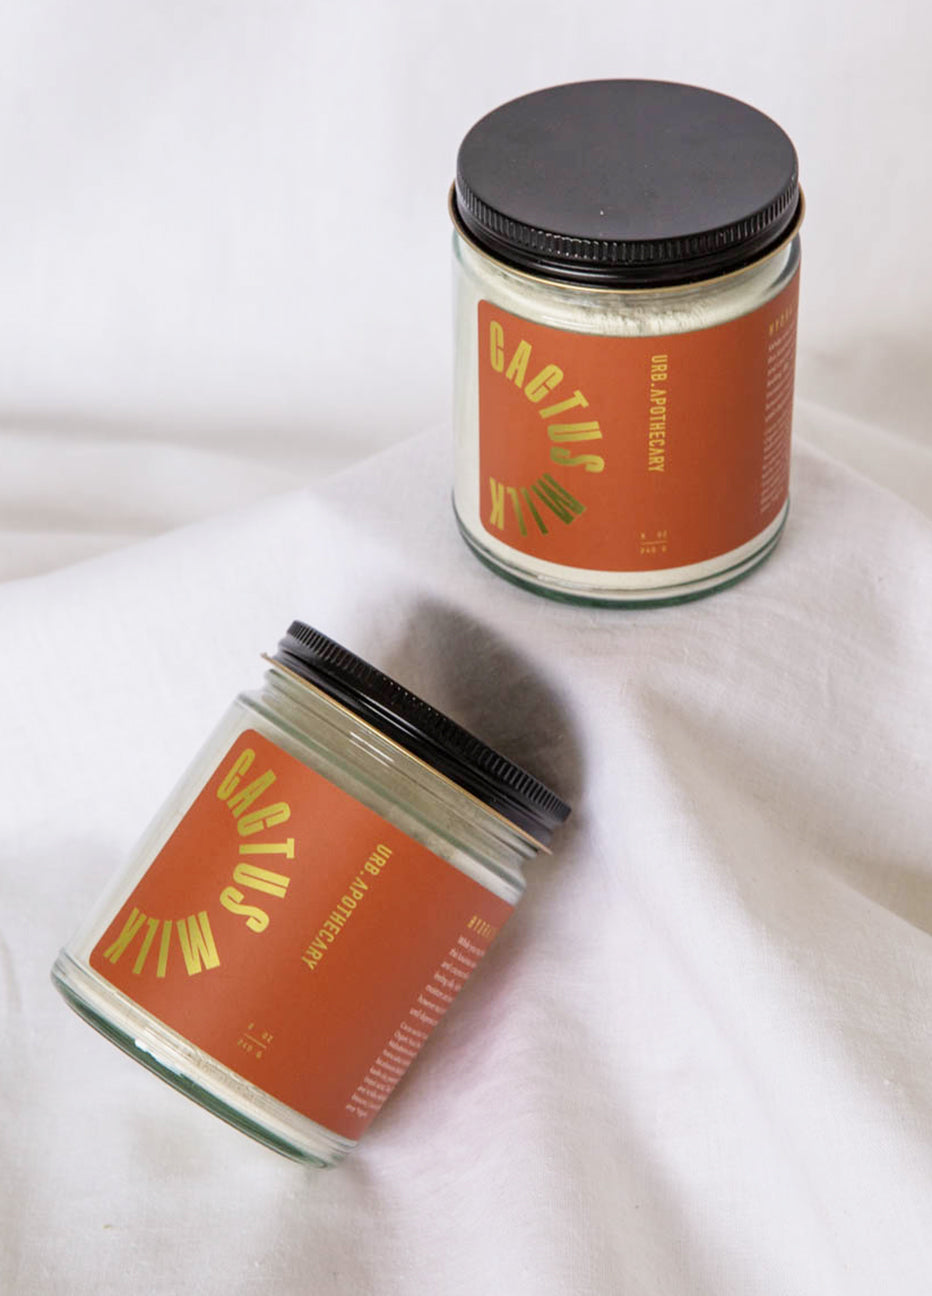 Urb Apothecary Cacao Mousse Mask Jar